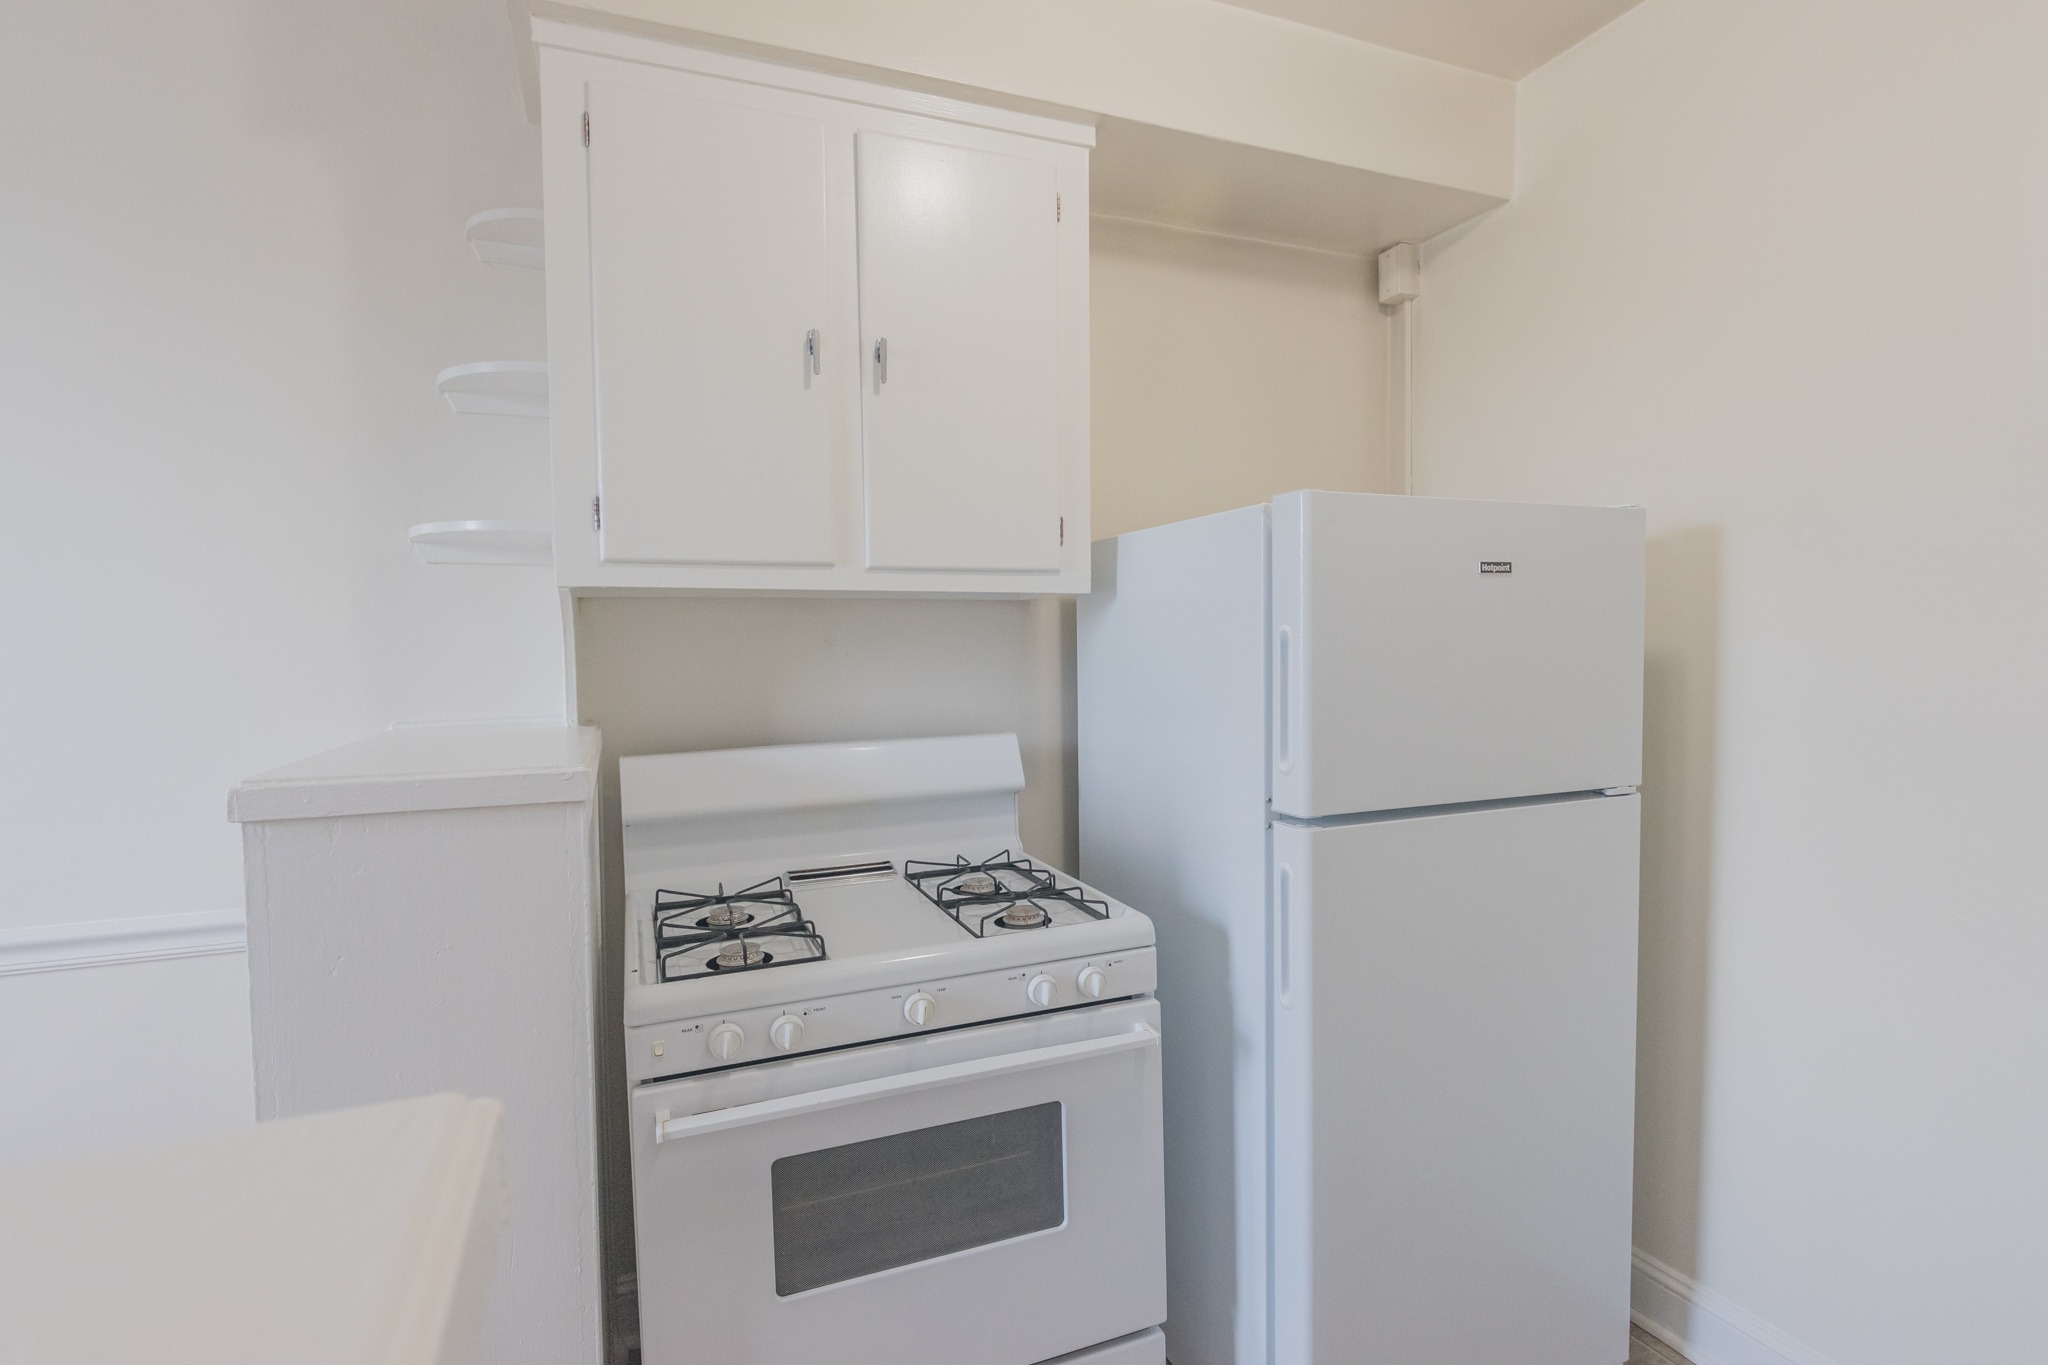 Kitchen area of an apartment, fitted with a stove, a fridge, and spacious cabinets